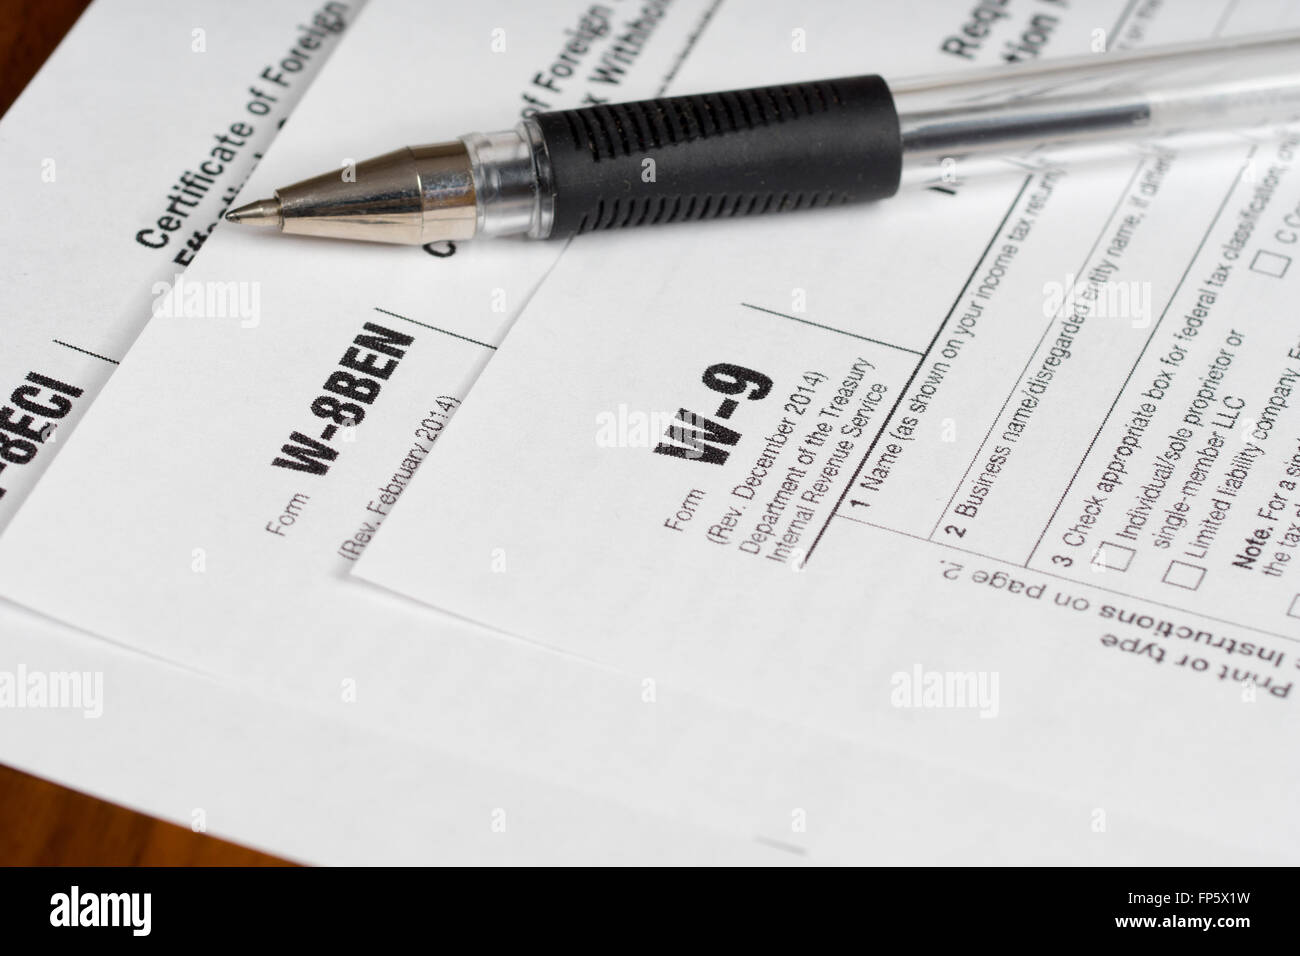 tax reporting forms with opened black pen Stock Photo